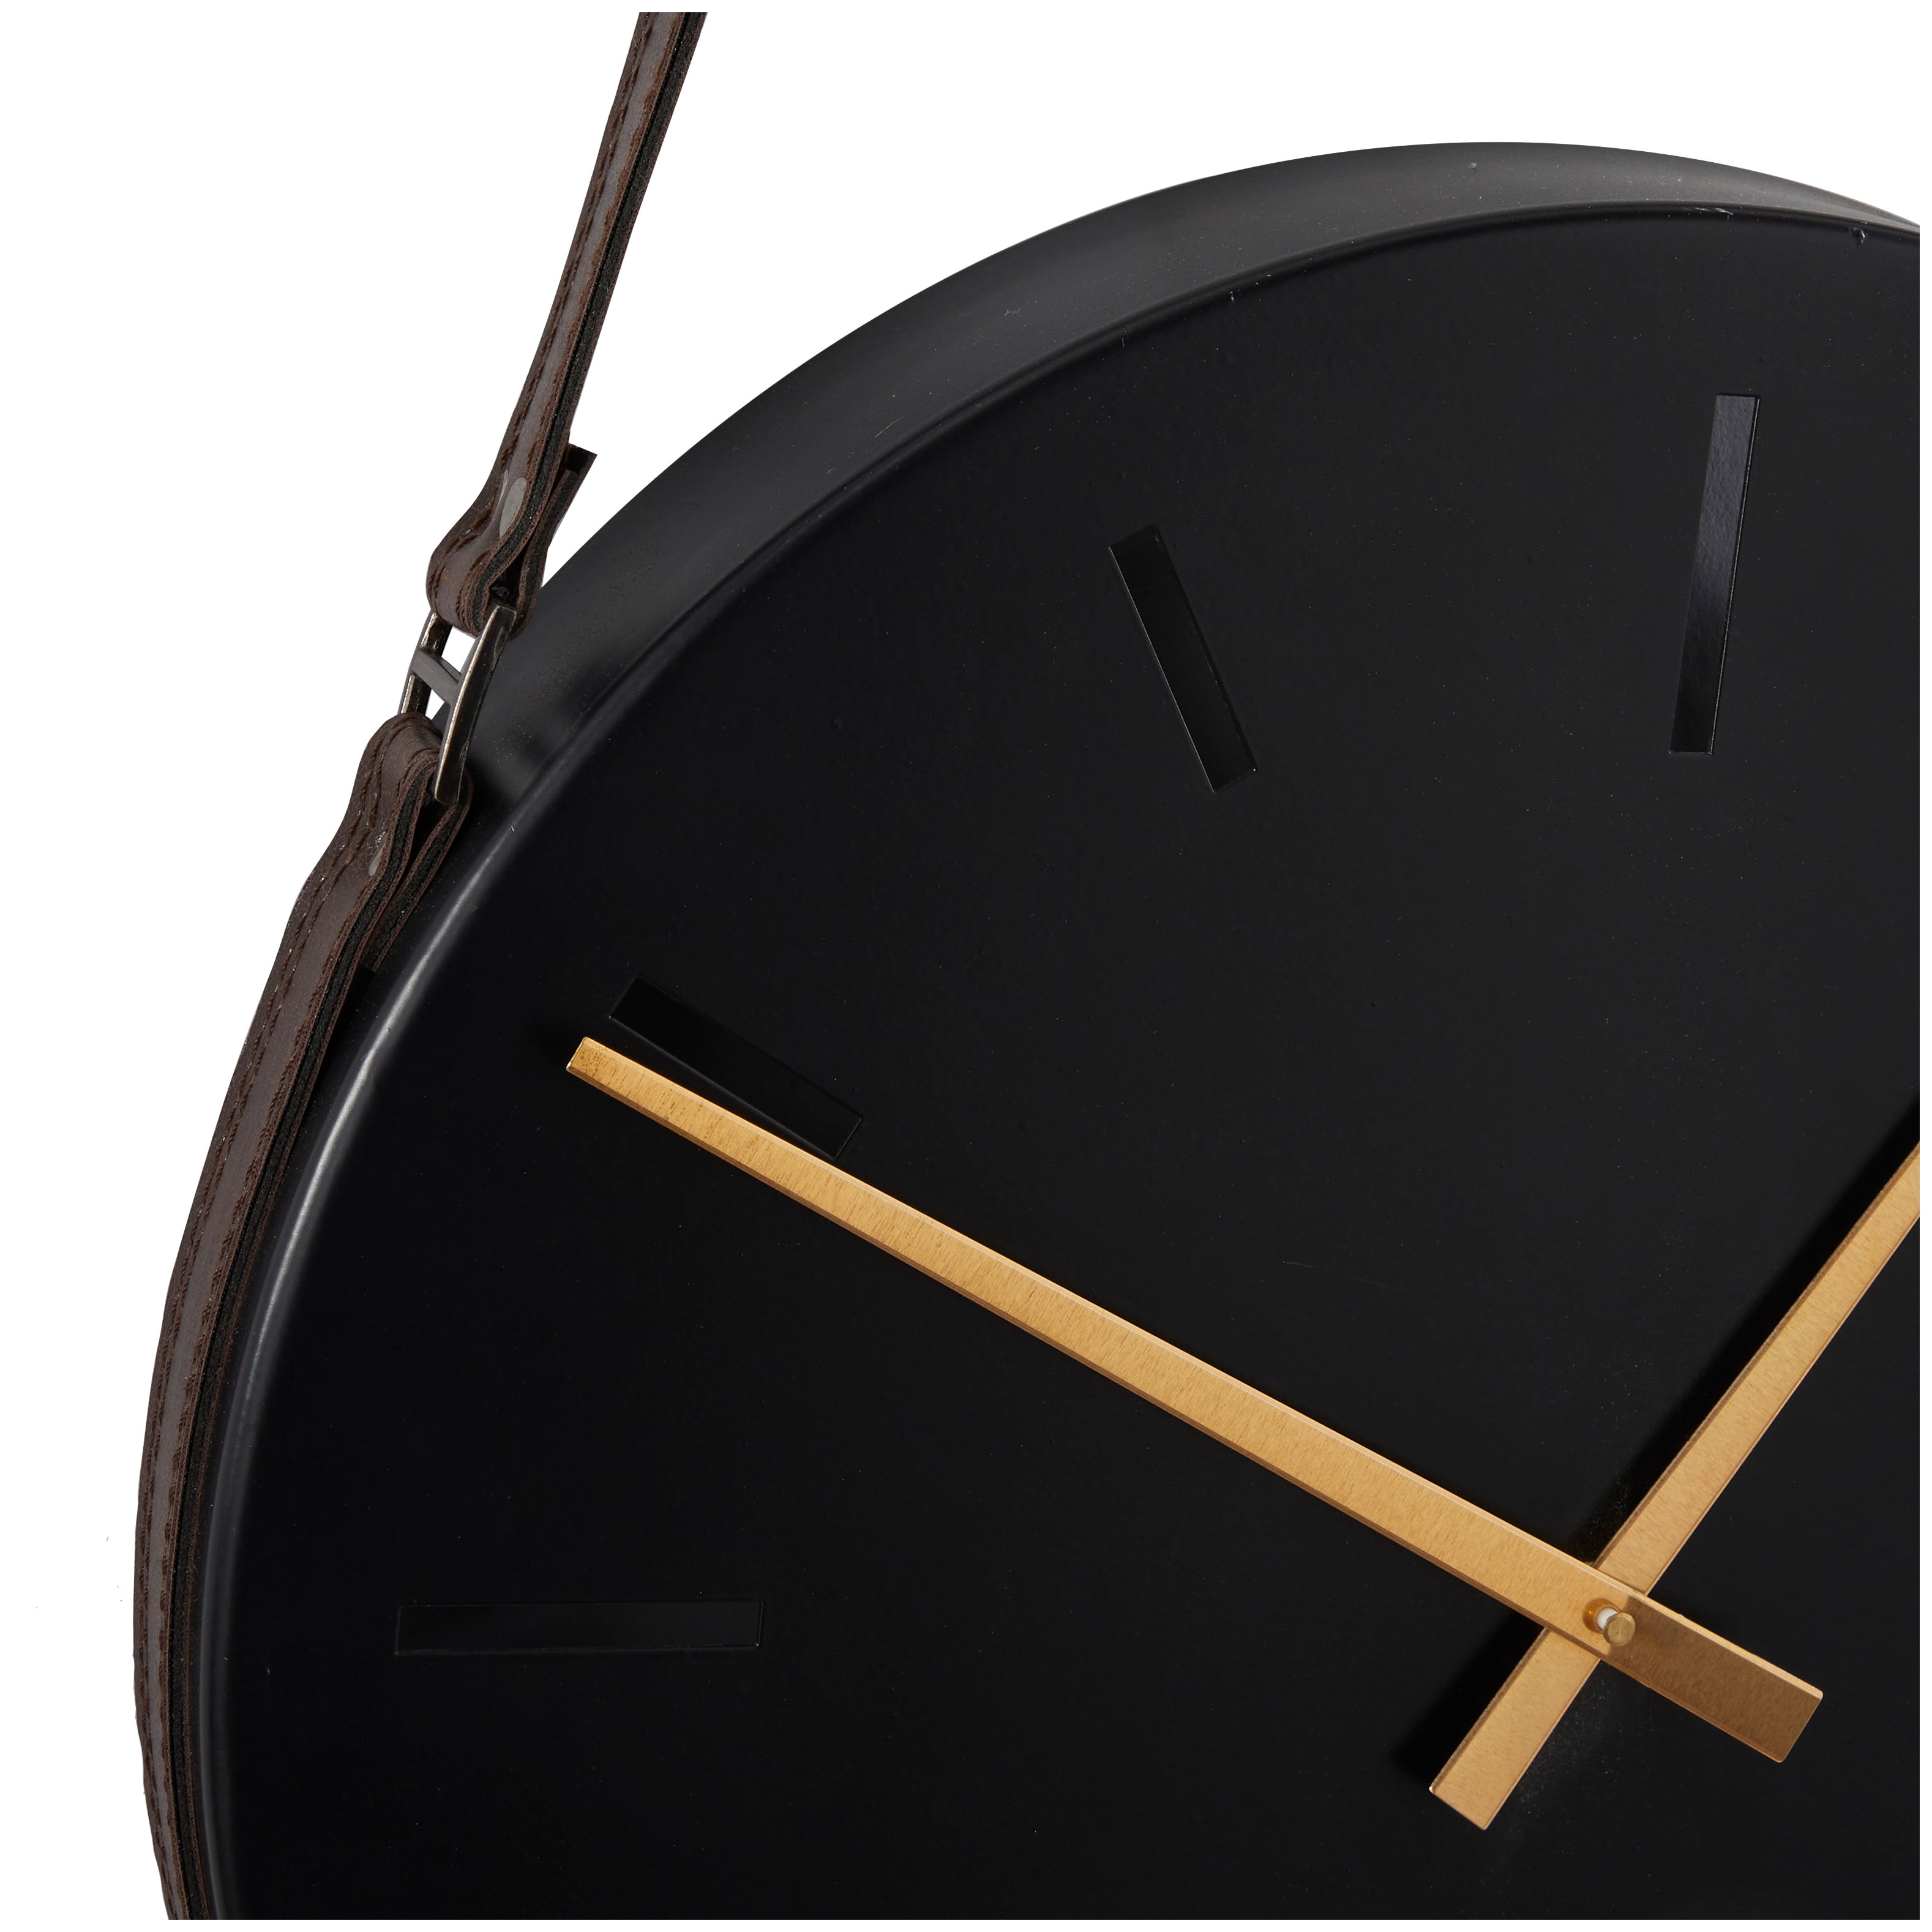 Stainless Steel Wall Clock with Leather Hanging Straps - Bed Bath